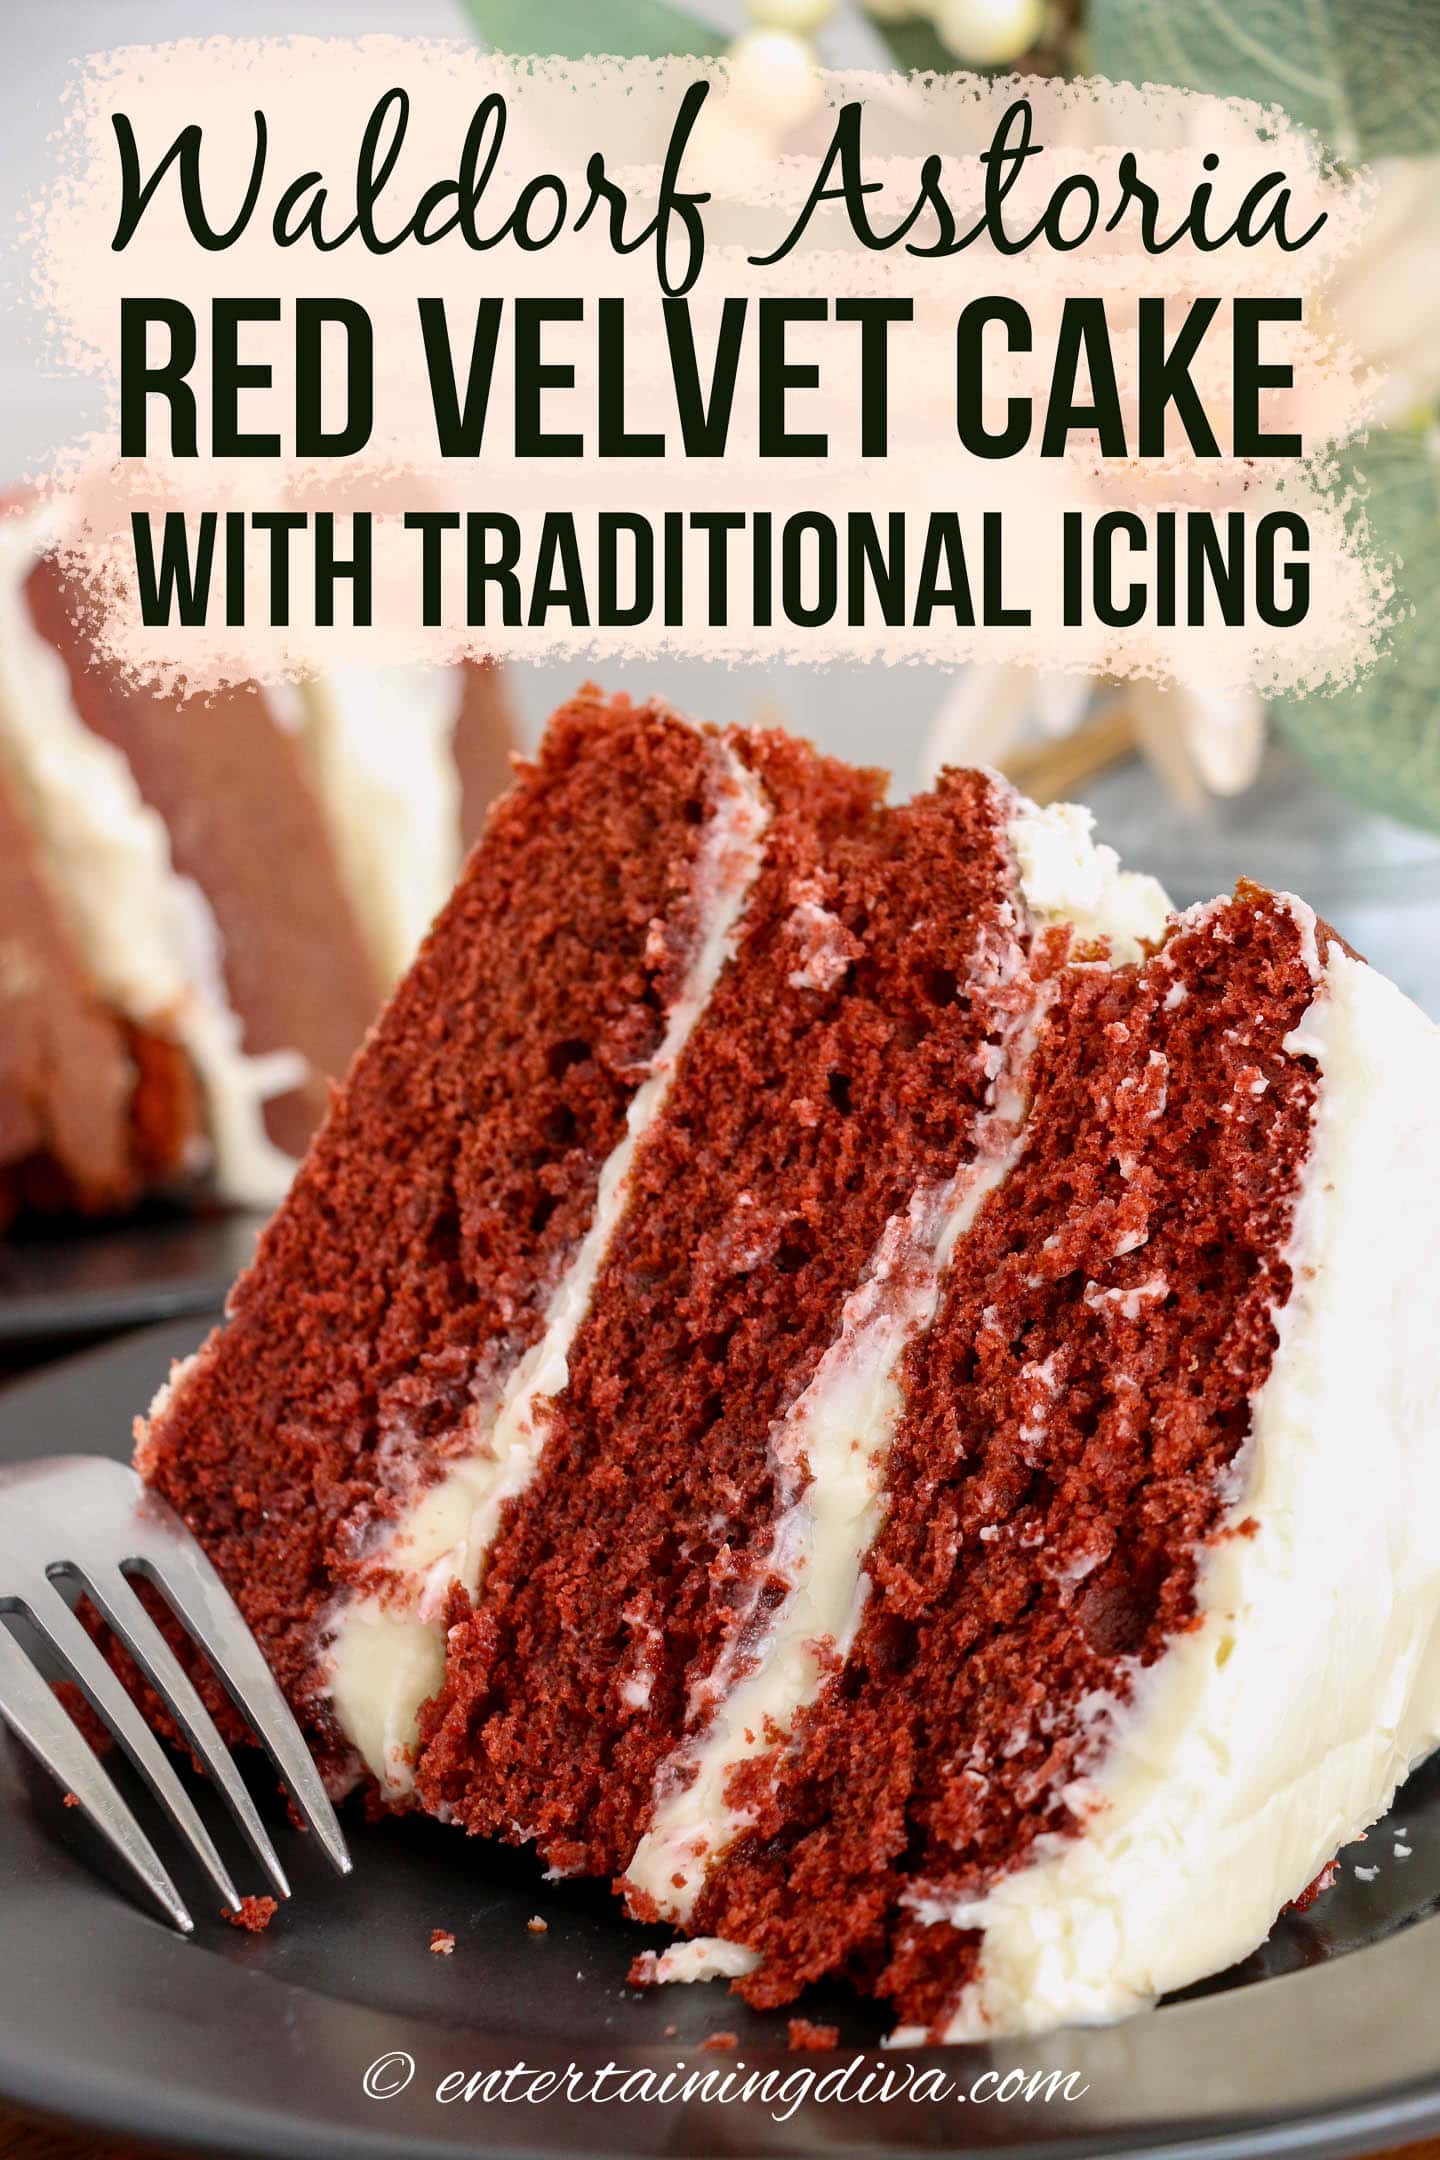 Waldorf Astoria red velvet cake with traditional icing